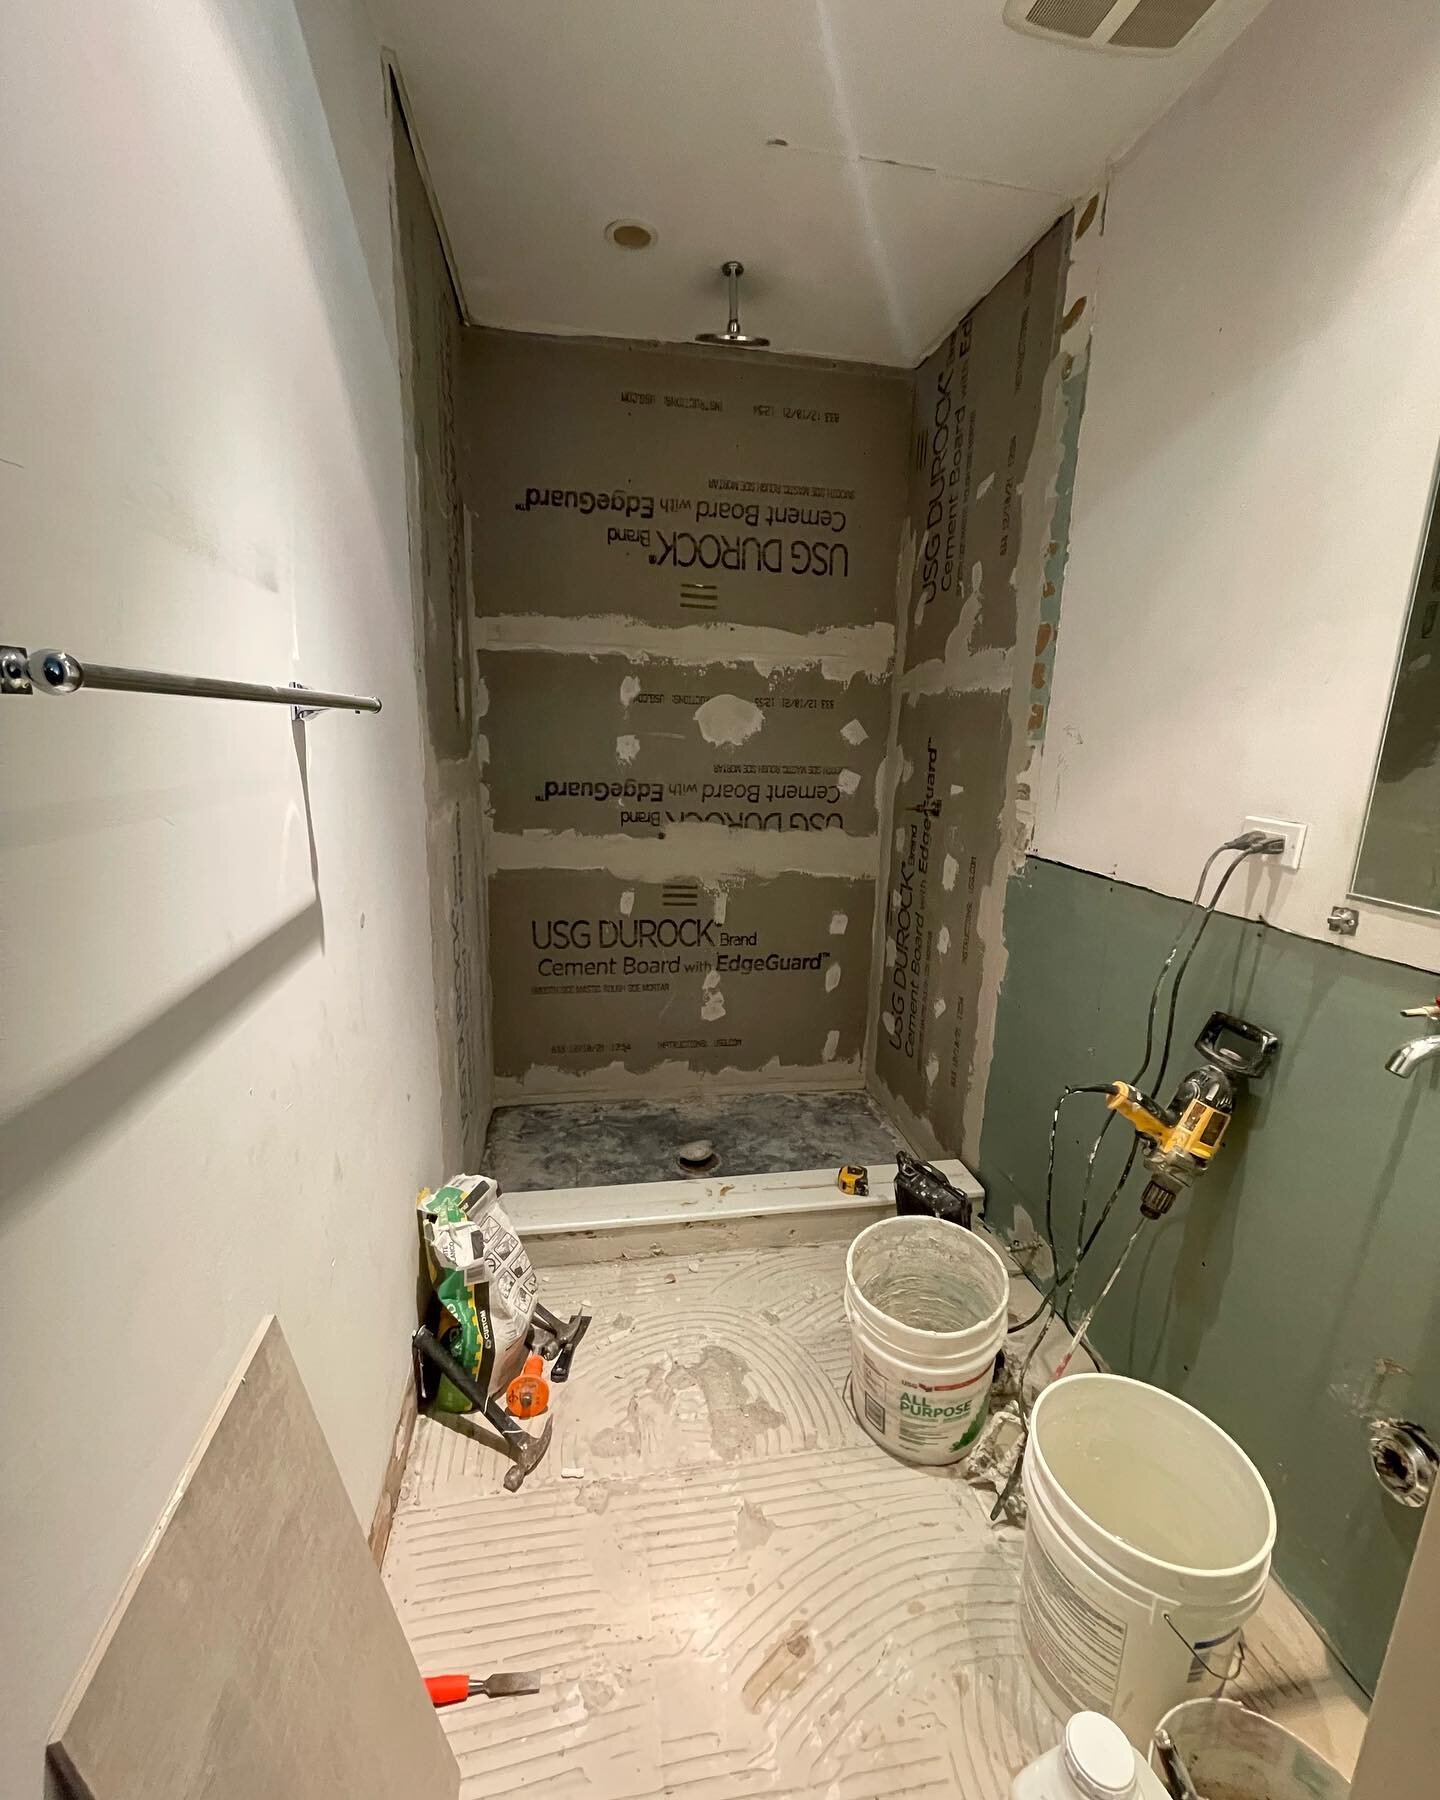 Cosmetic Updates to this Williamsburg, Brooklyn Bathroom including New Tiles, Shower Door Trims, Floating Vanity and most importantly we stopped an ongoing leak due to the previous contractors lack of knowledge by using Laticrete Hydro Ban Waterproof